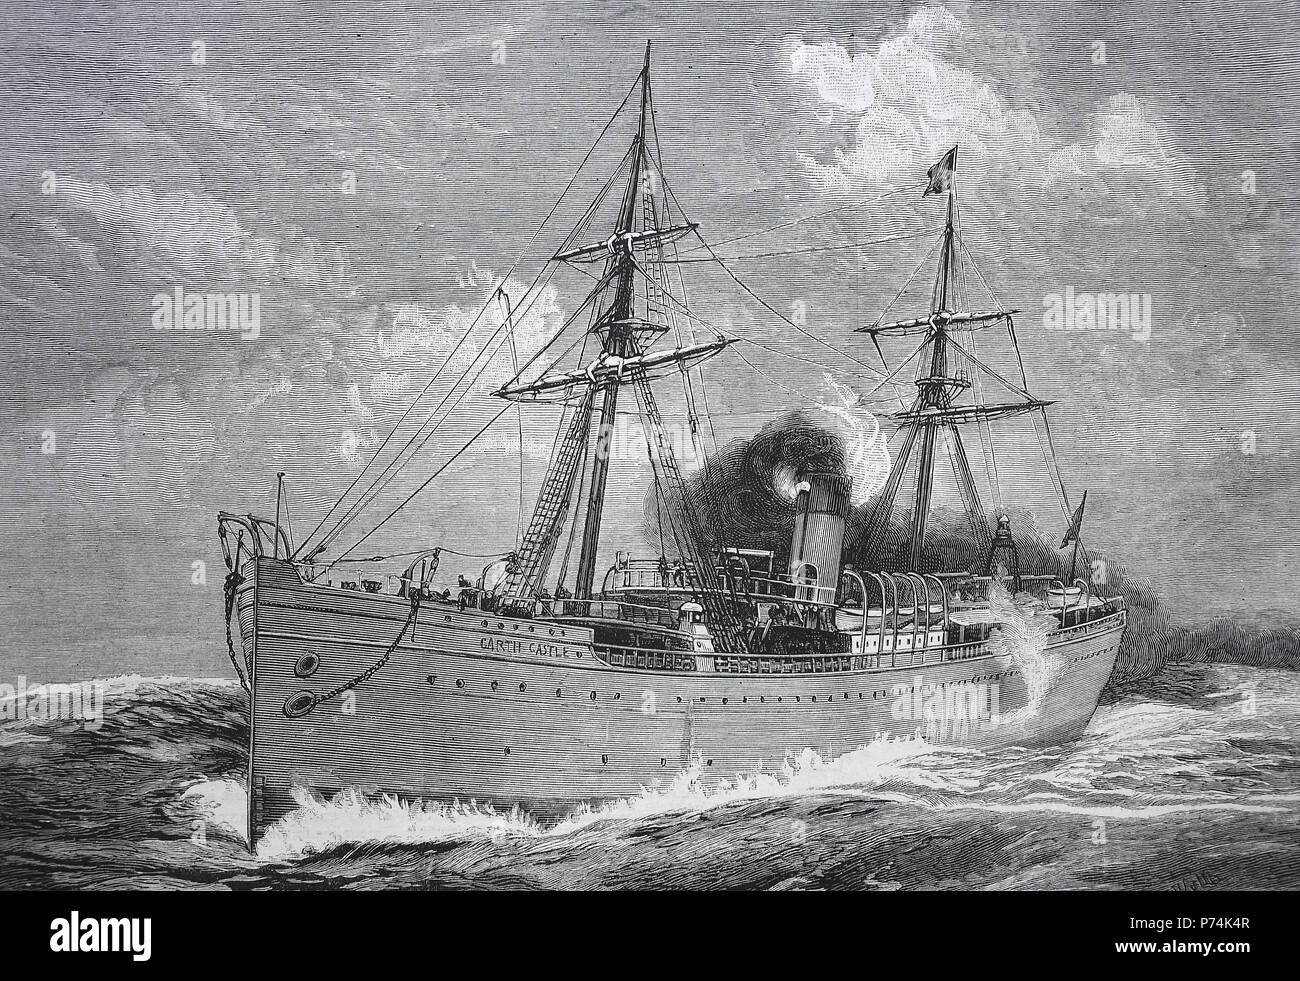 the Garth Castle, new steamer of the castle  line of South African Mail  packets, digital improved reproduction from an original print from the year 1881 Stock Photo